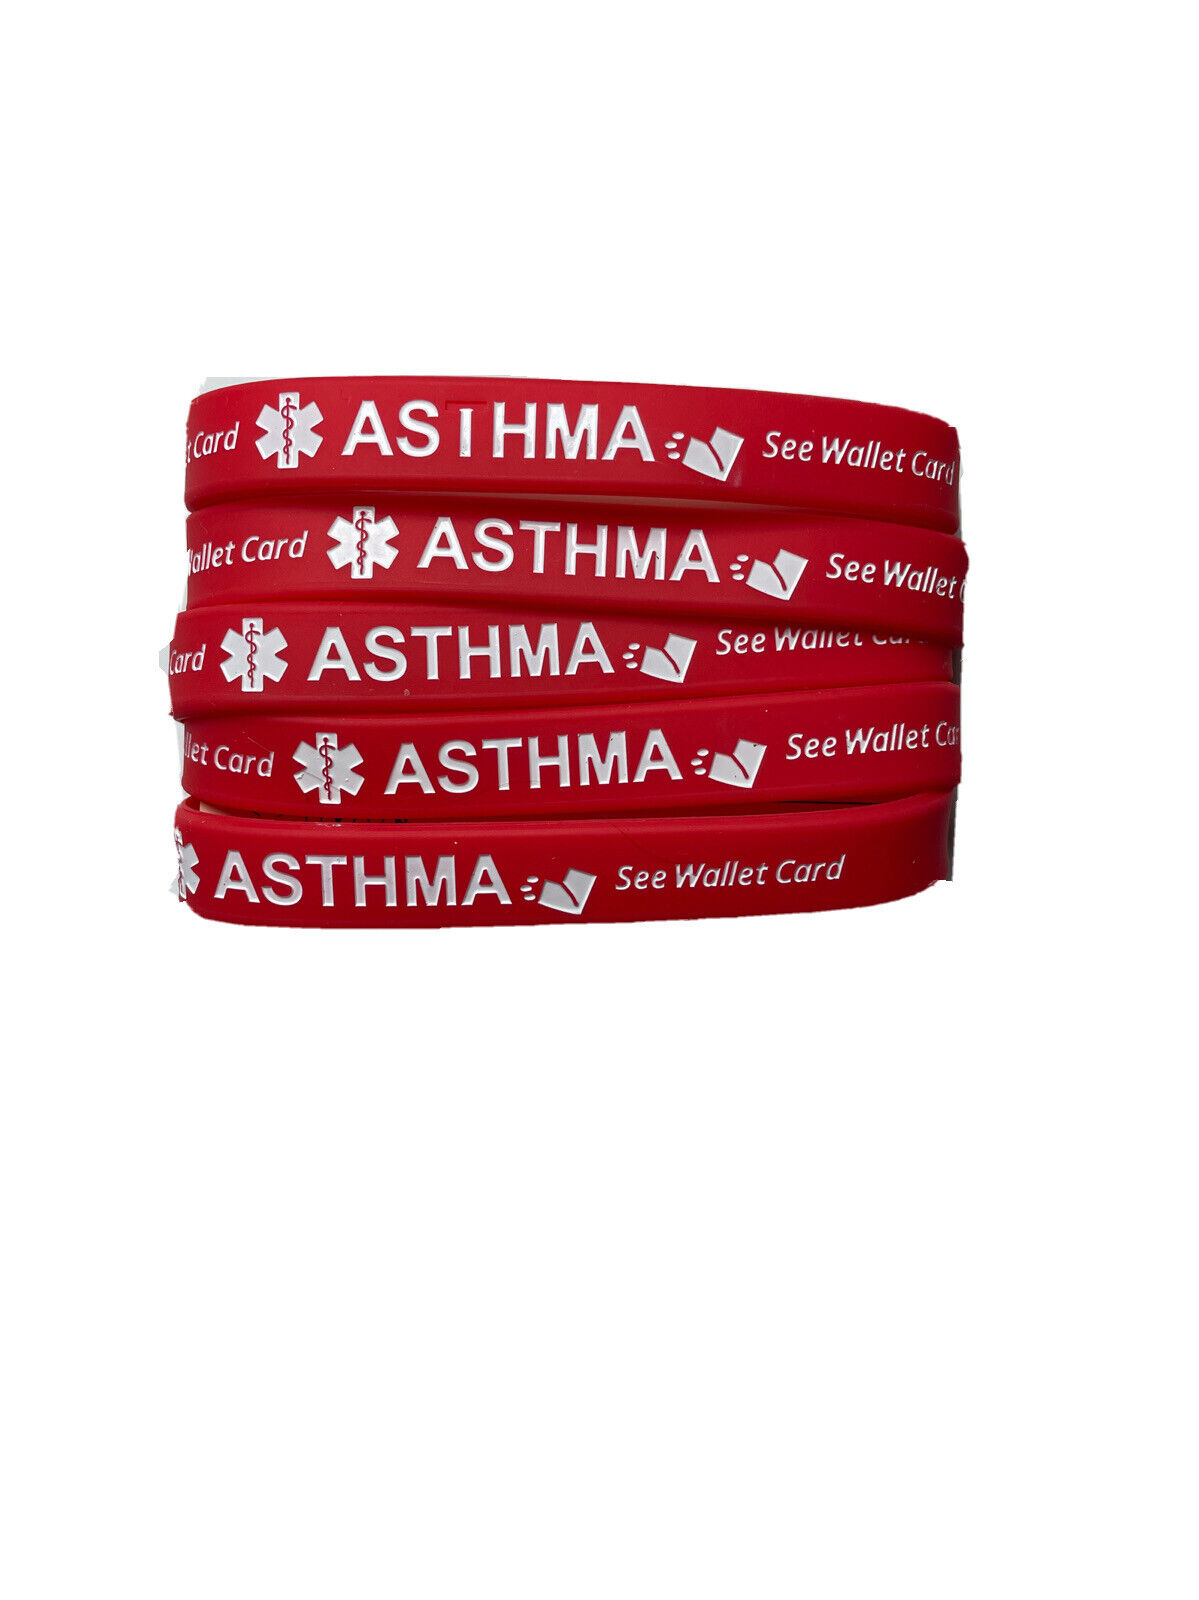 Asthma Alert Silicone Wristband Bracelets 5 Red Medical Condition with Info Card Warp united Does Not Apply